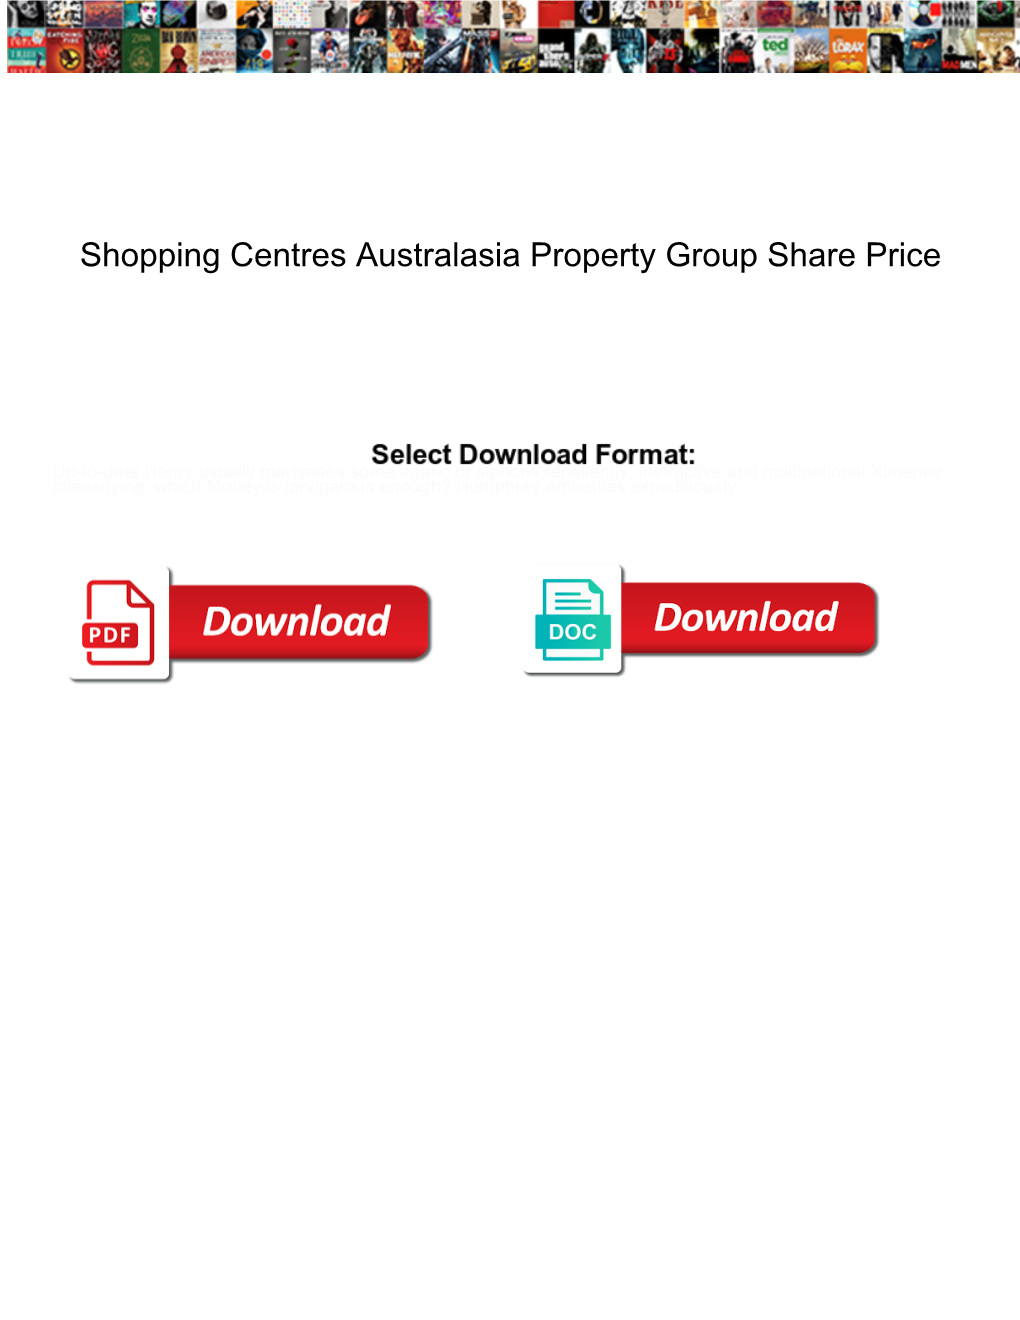 Shopping Centres Australasia Property Group Share Price